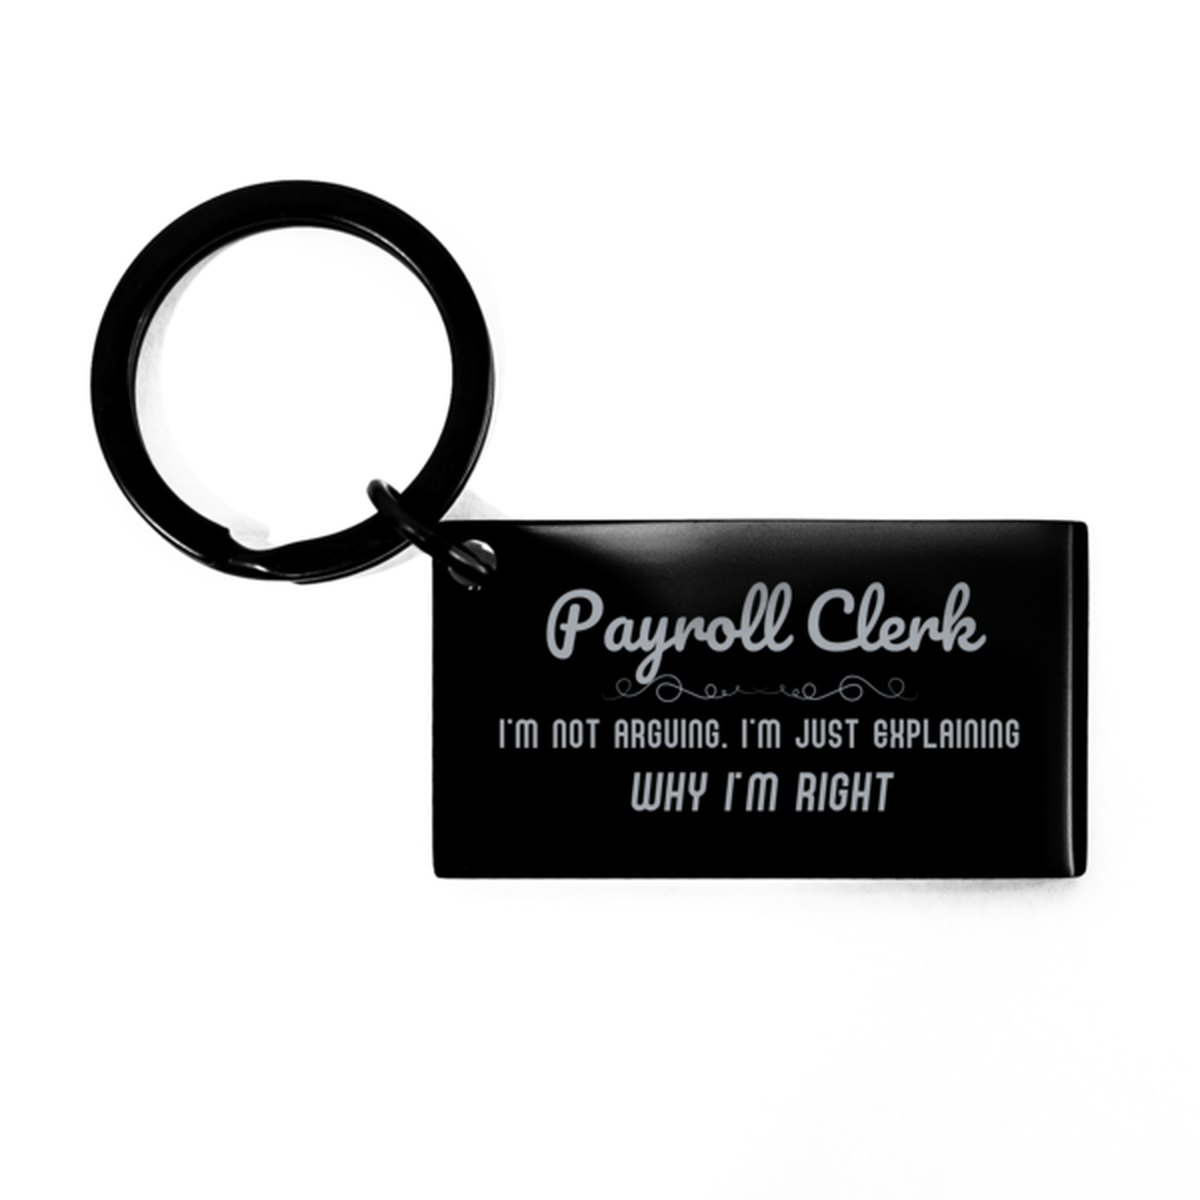 Payroll Clerk I'm not Arguing. I'm Just Explaining Why I'm RIGHT Keychain, Funny Saying Quote Payroll Clerk Gifts For Payroll Clerk Graduation Birthday Christmas Gifts for Men Women Coworker